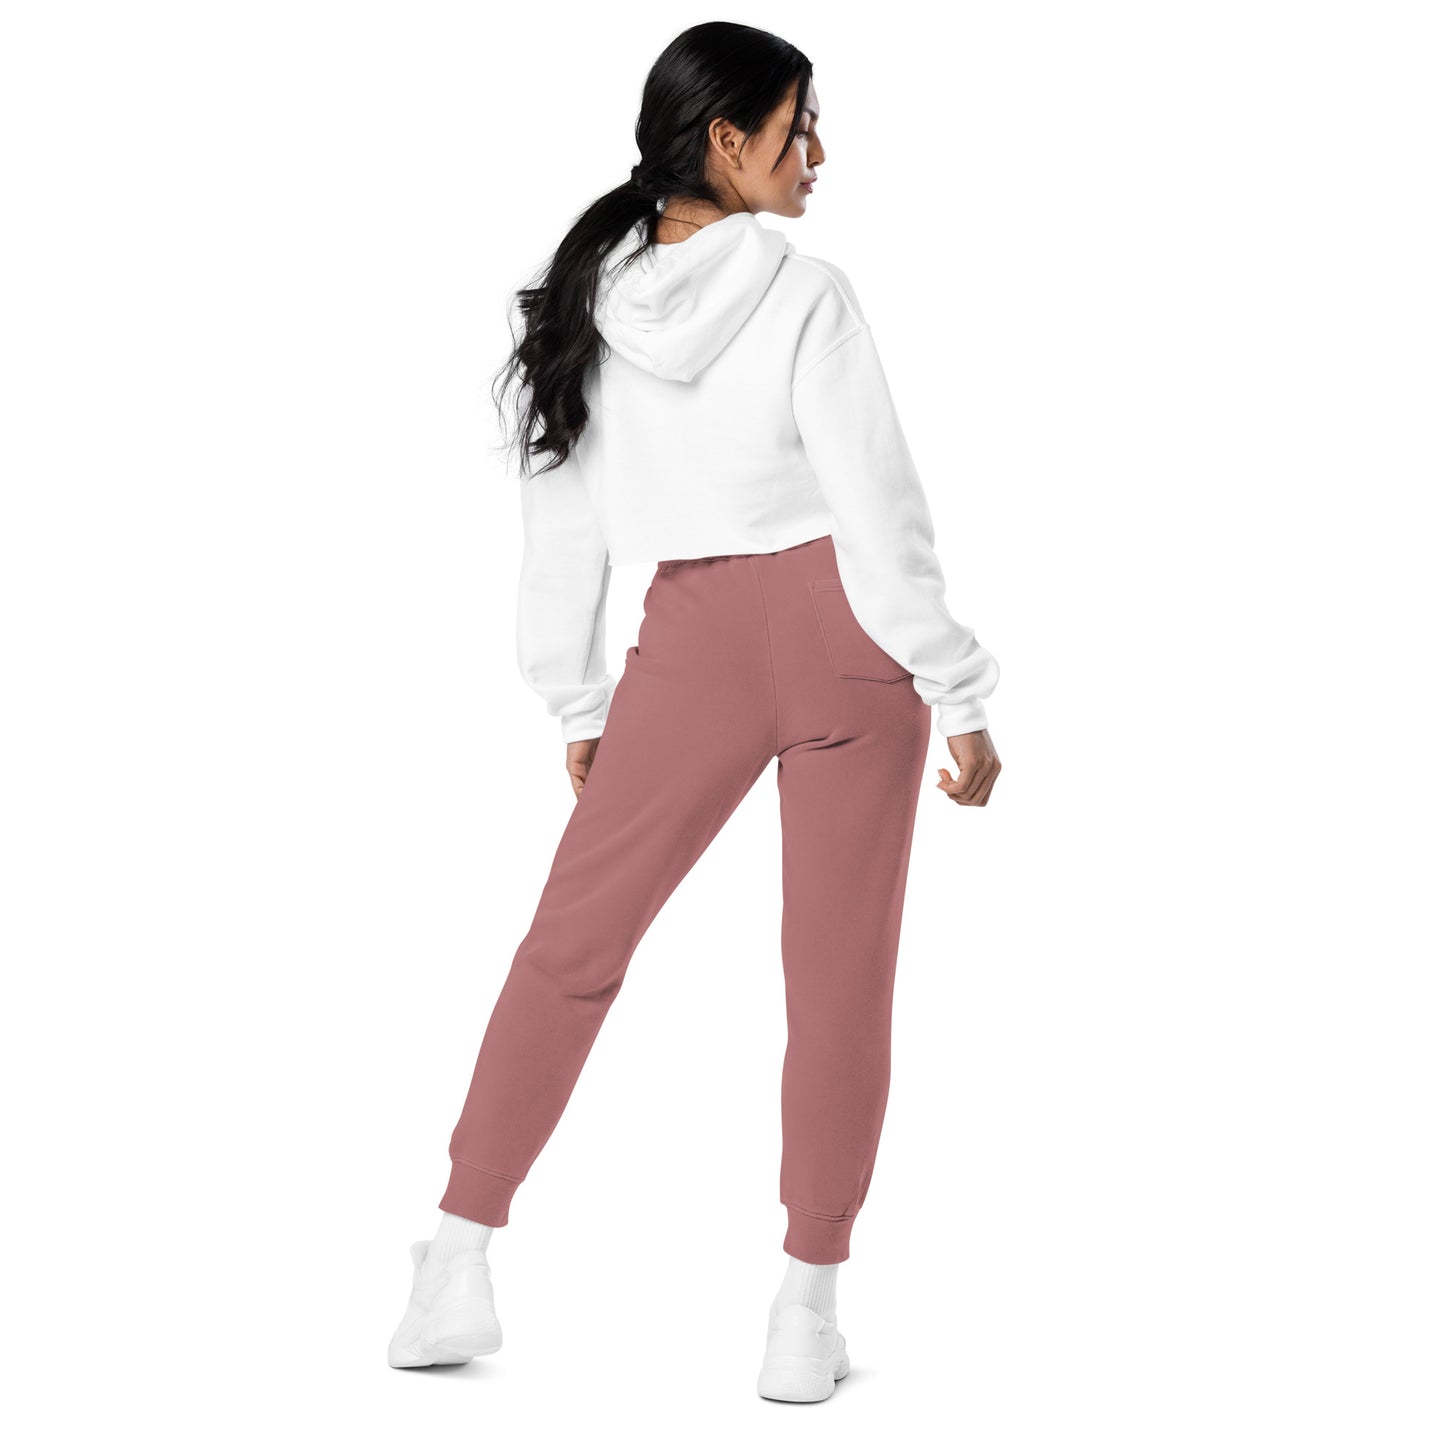 Adonis-Creations - Women's pigment-dyed sweatpants